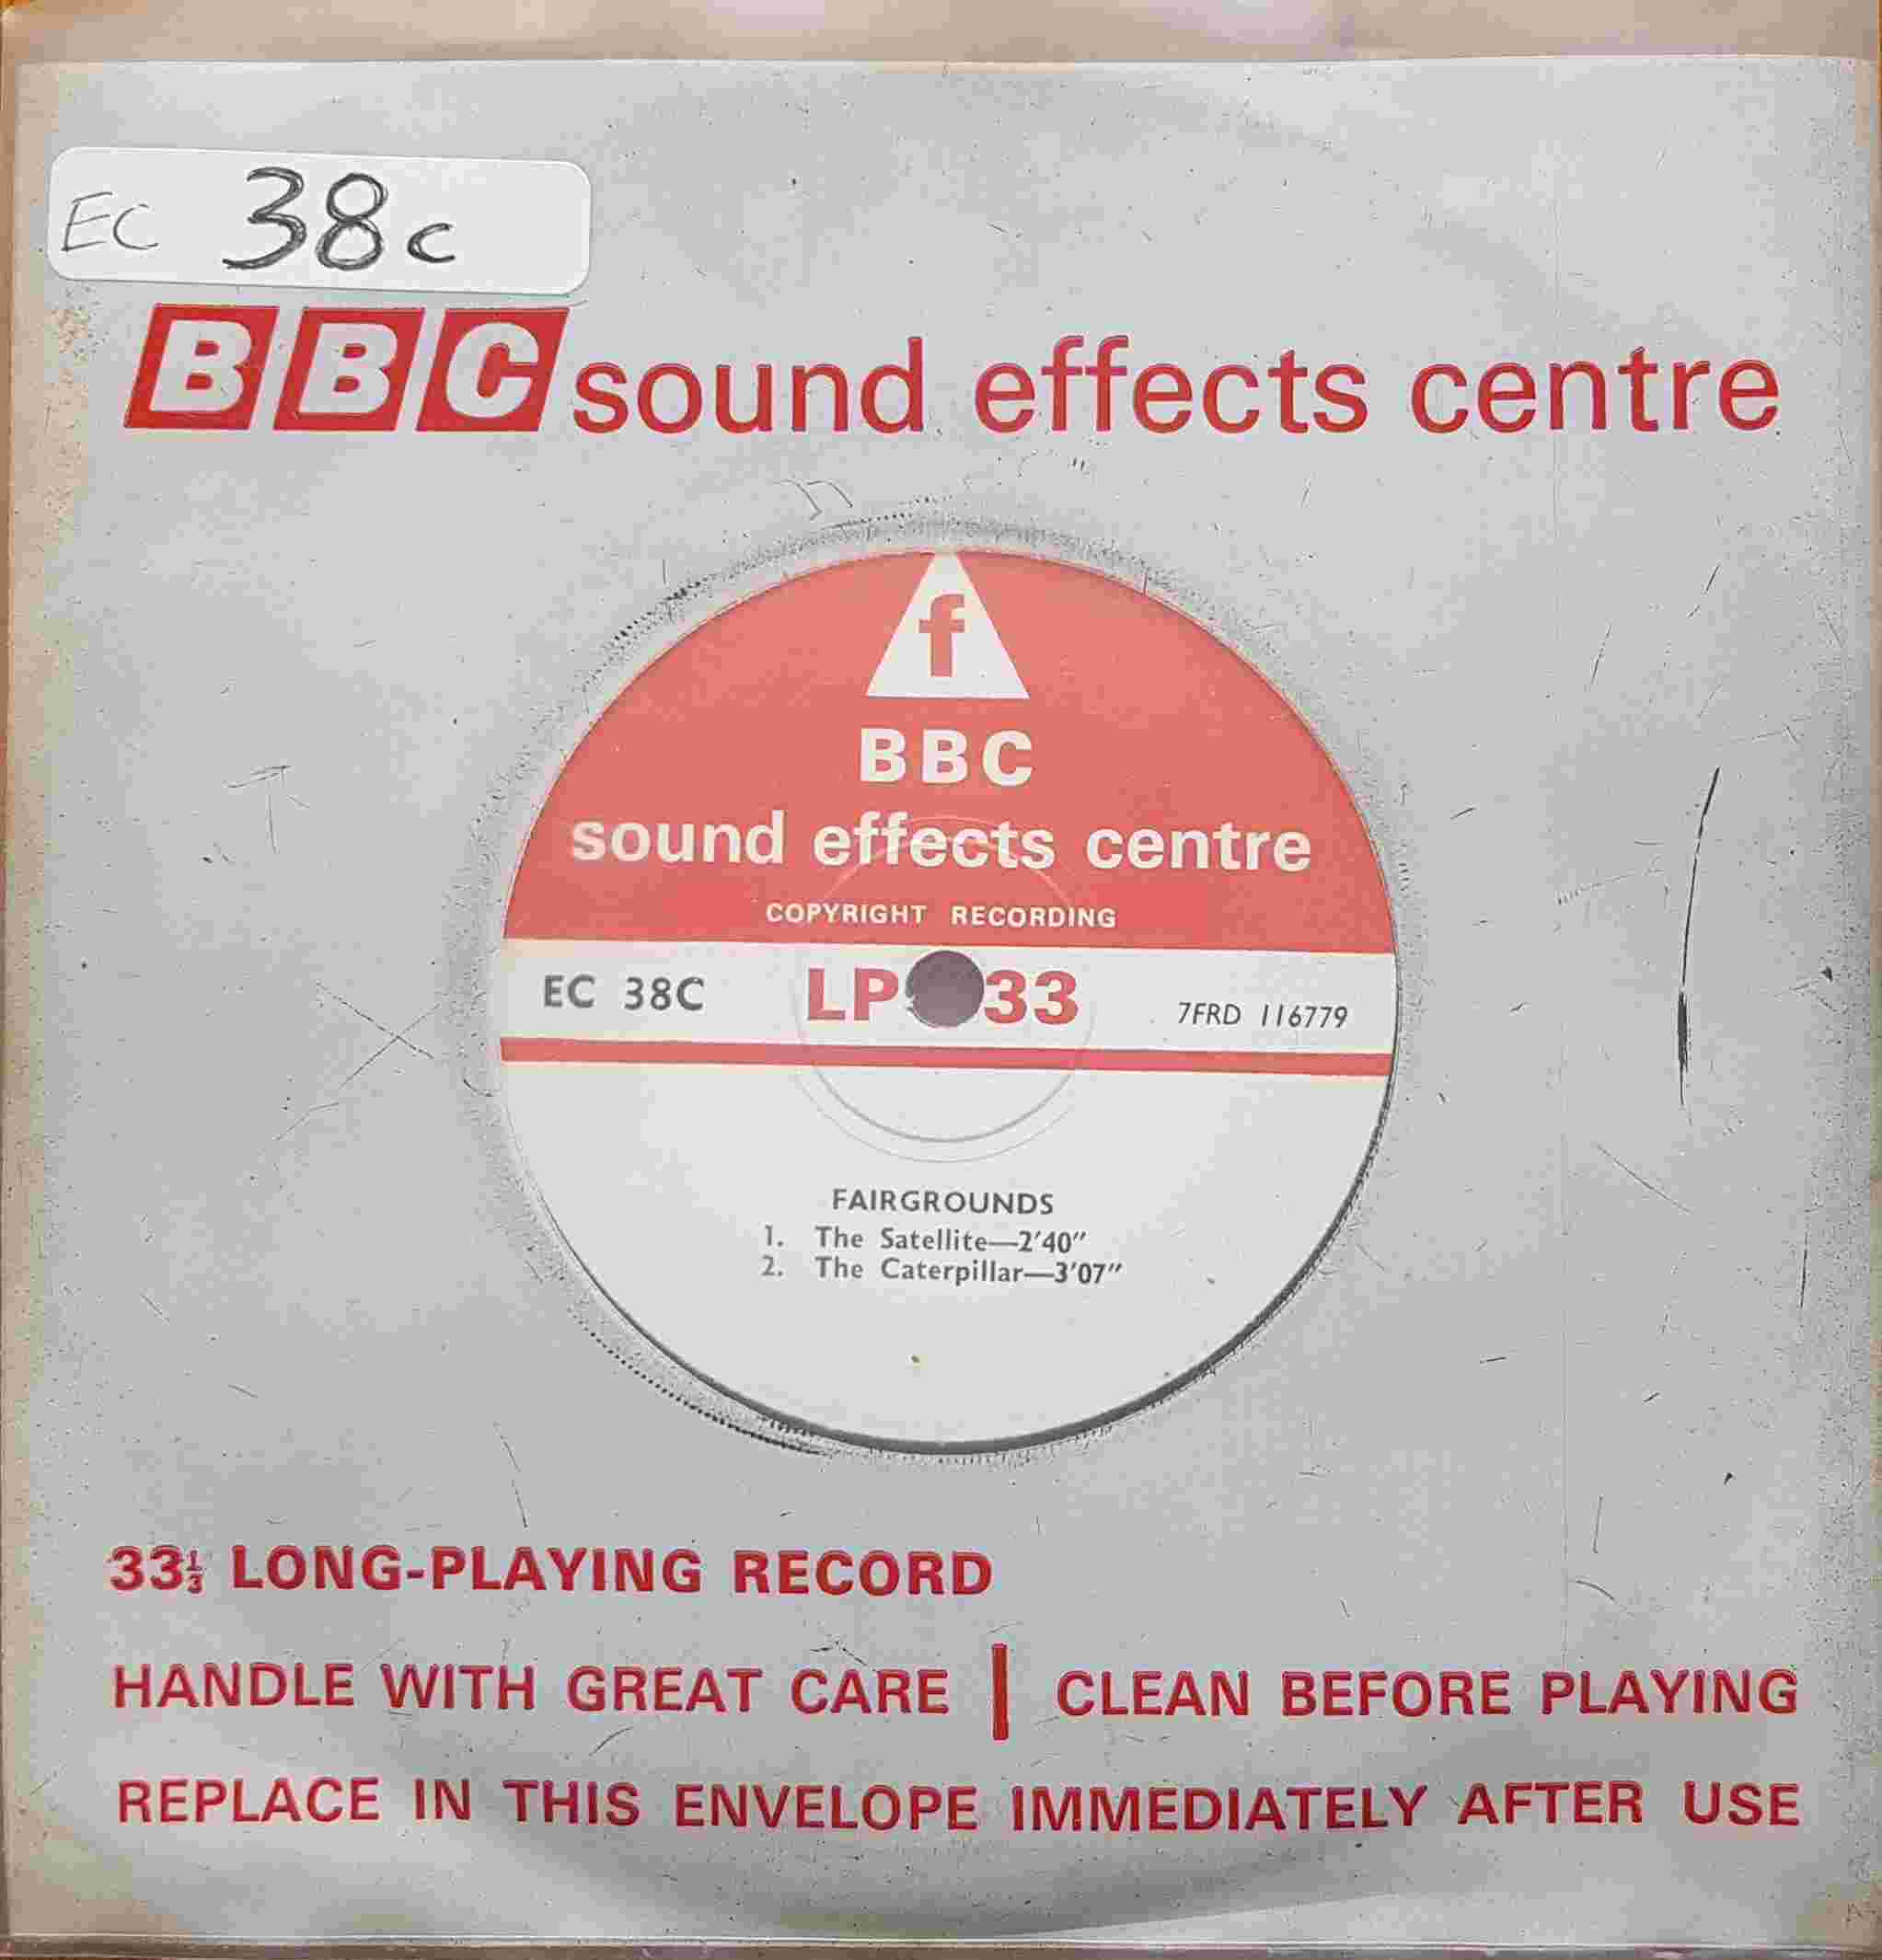 Picture of EC 38C Fairgounds single by artist Not registered from the BBC records and Tapes library